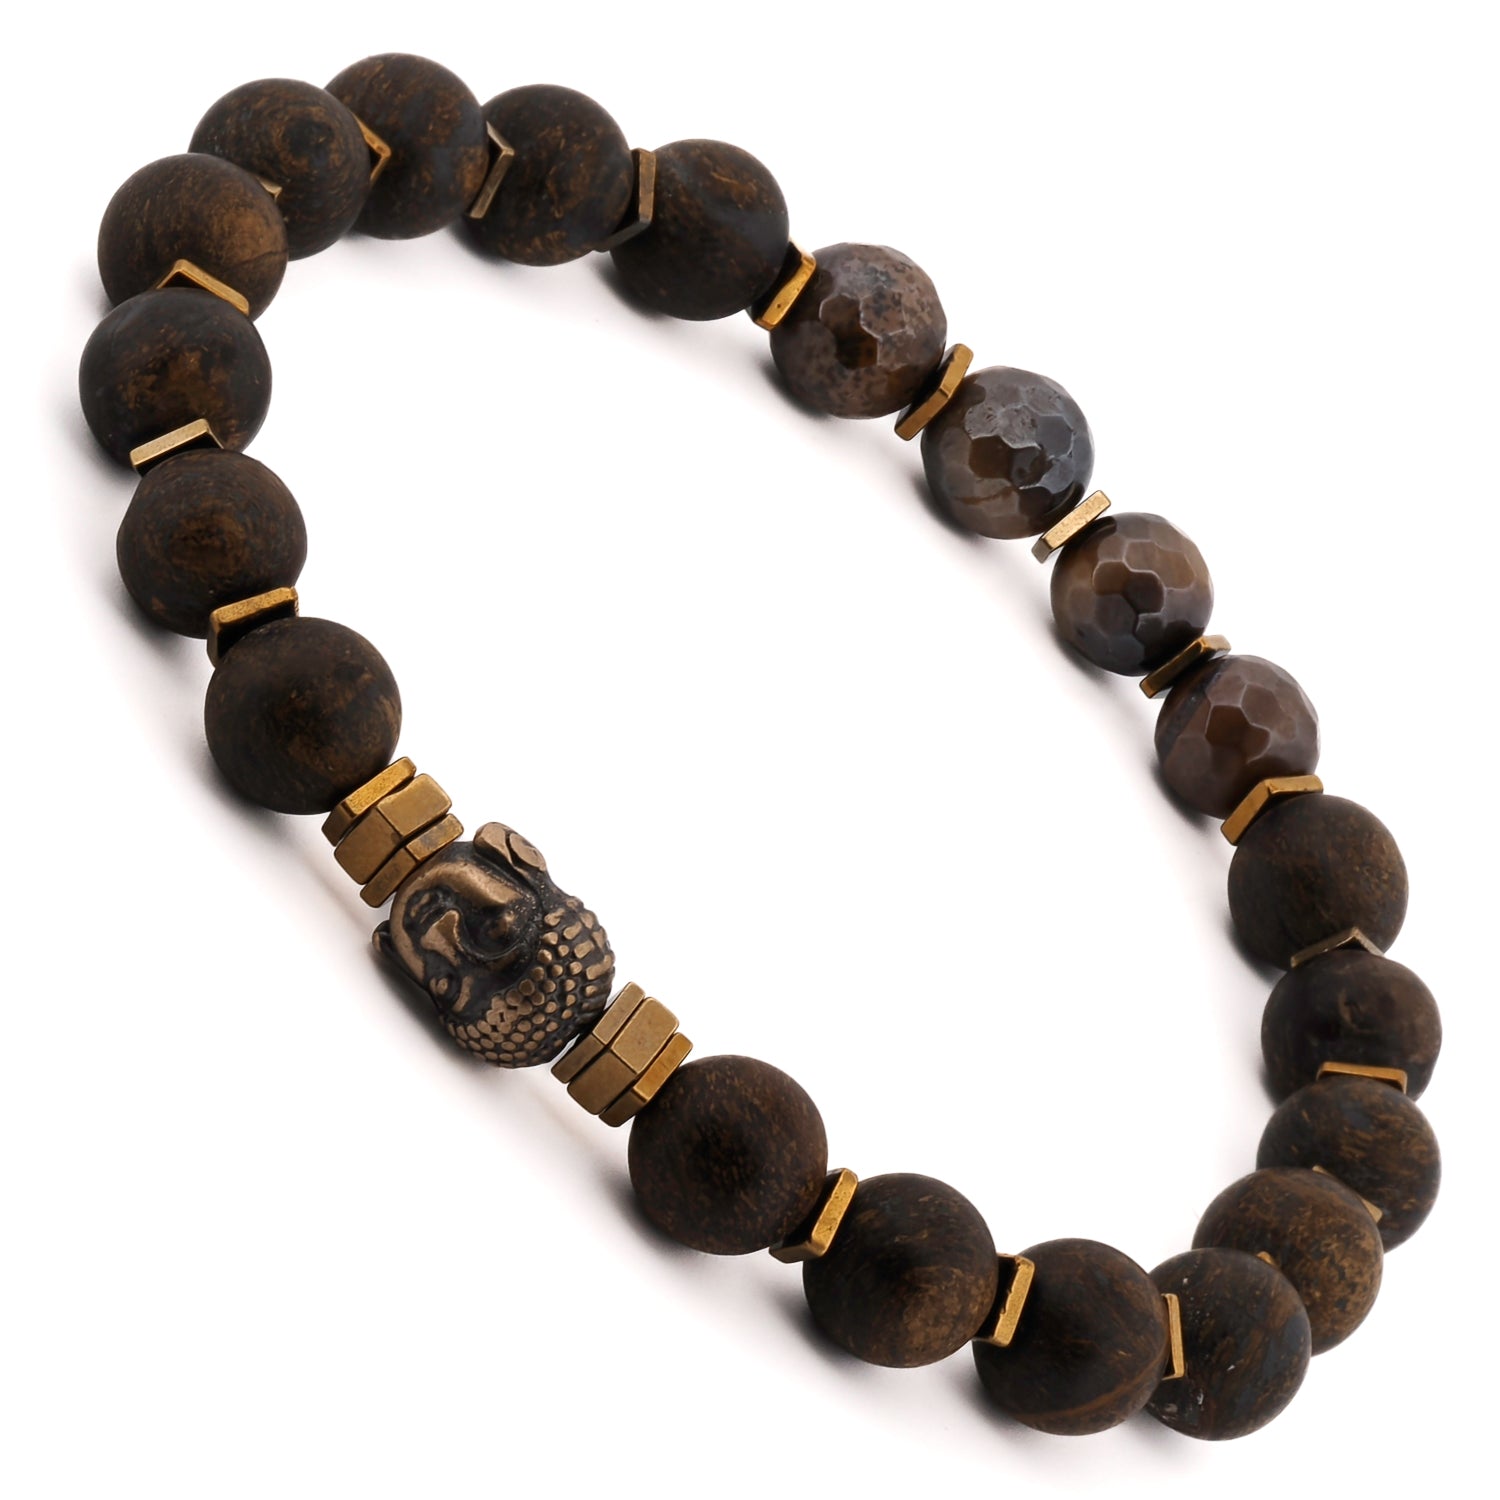 Unique Nepal Spiritual Beads and Bronze Buddha Bracelet, handcrafted with gold hematite spacers